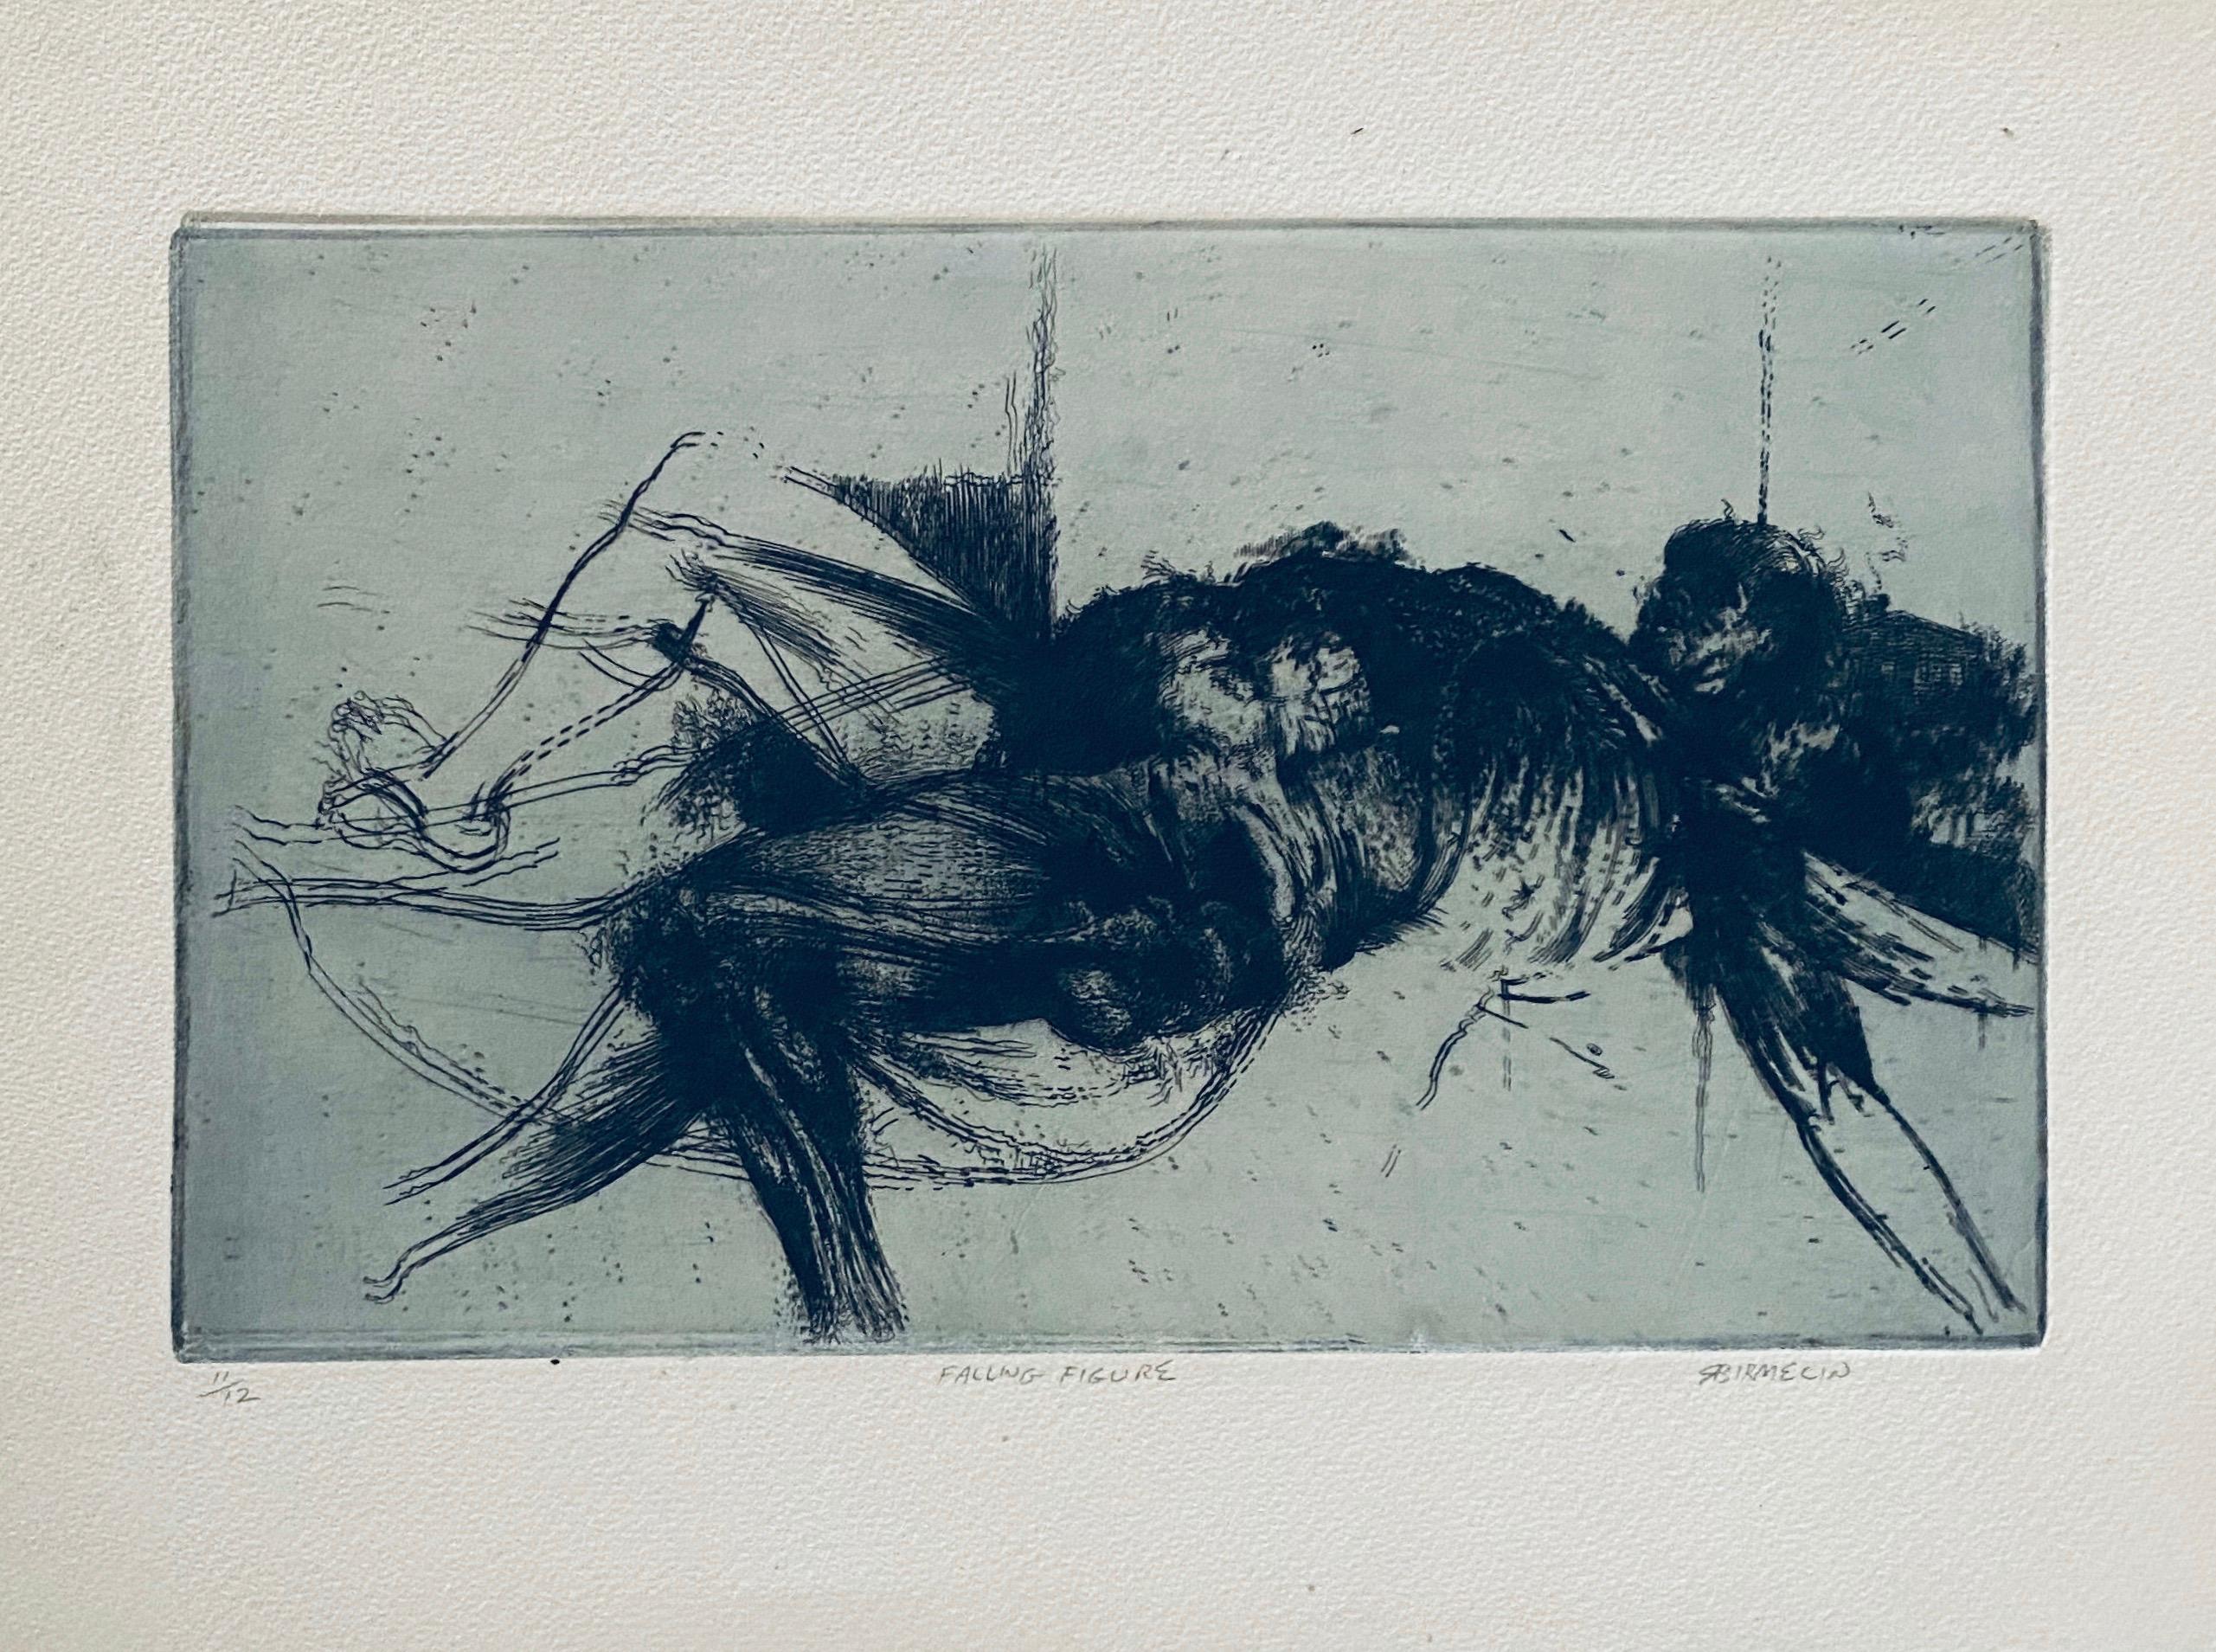 Falling Figure, American Modernist Abstract Etching